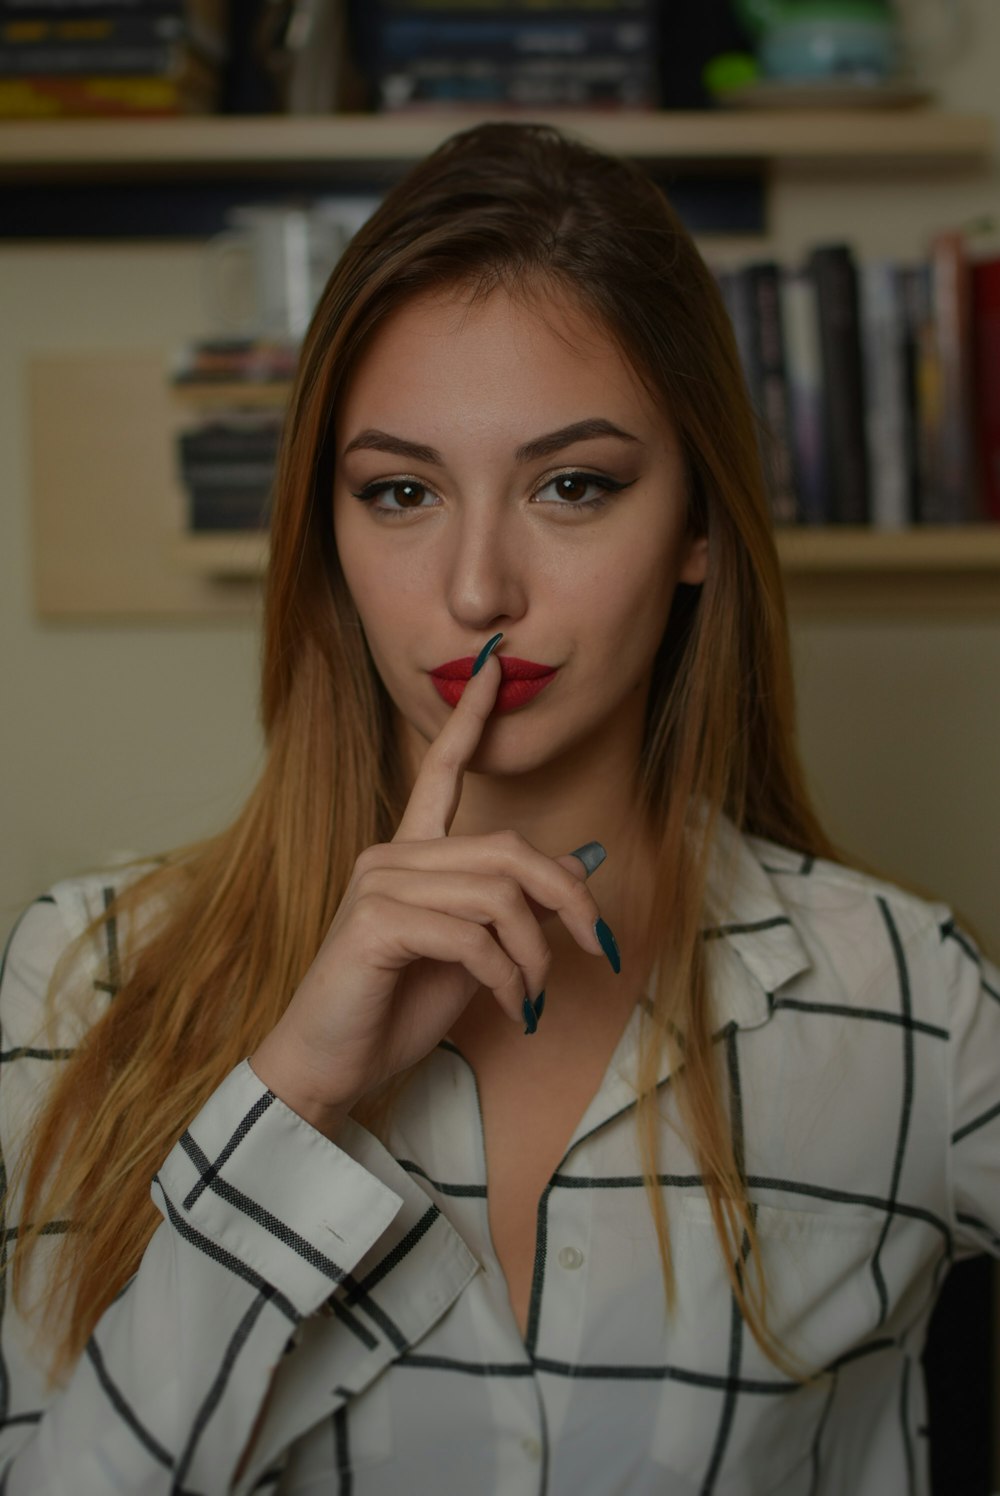 woman putting her index finger closer to her lips